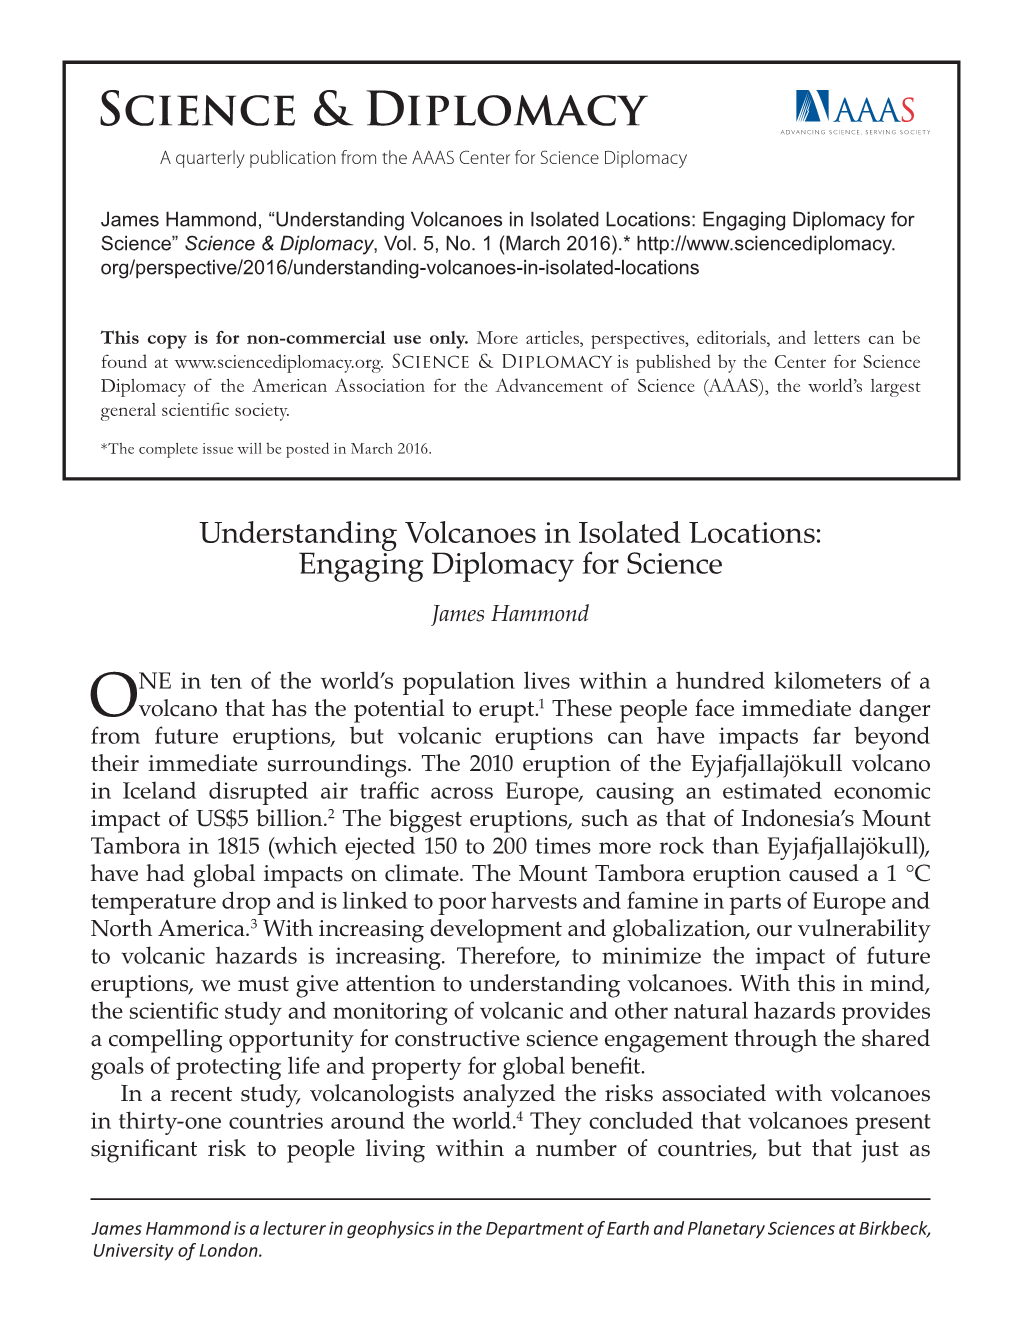 Understanding Volcanoes in Isolated Locations: Engaging Diplomacy for Science” Science & Diplomacy, Vol